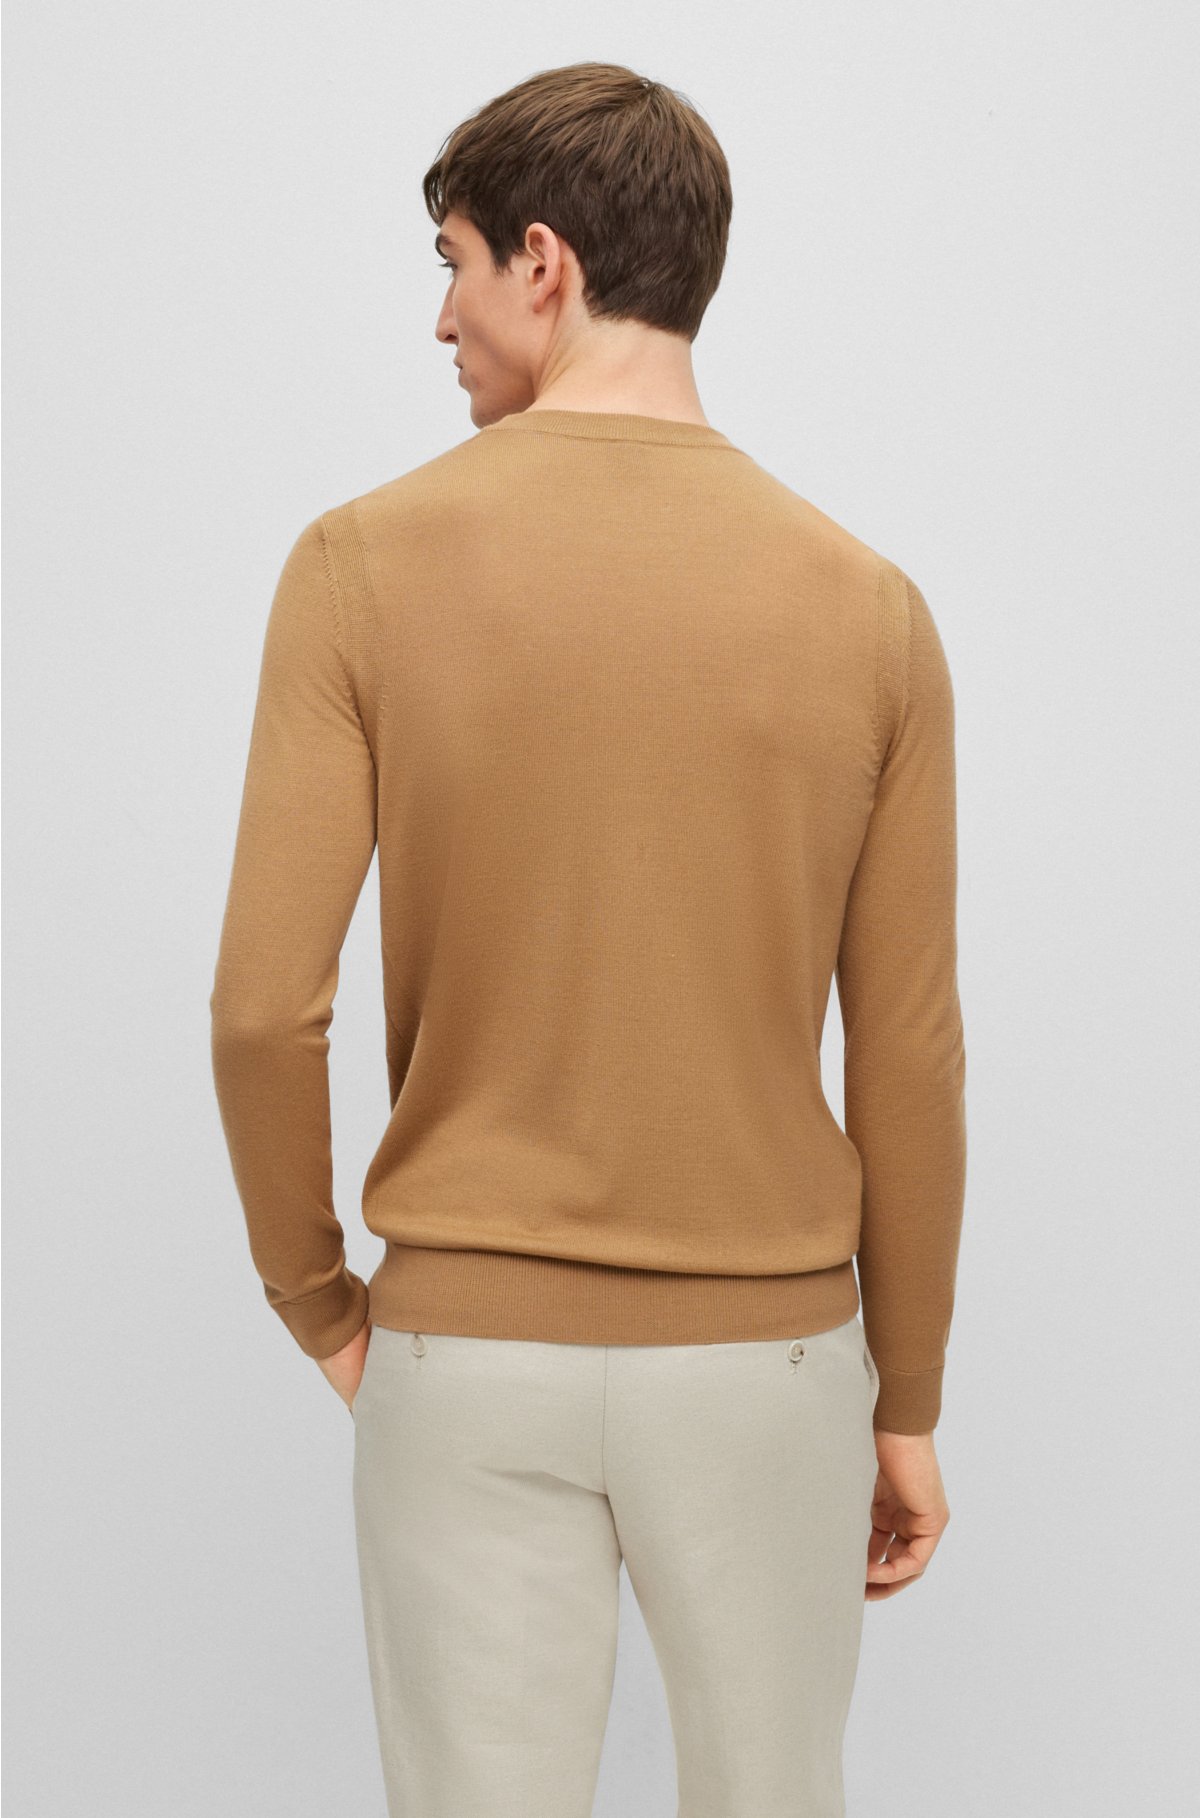 Regular-fit sweater in wool, silk and cashmere, Beige